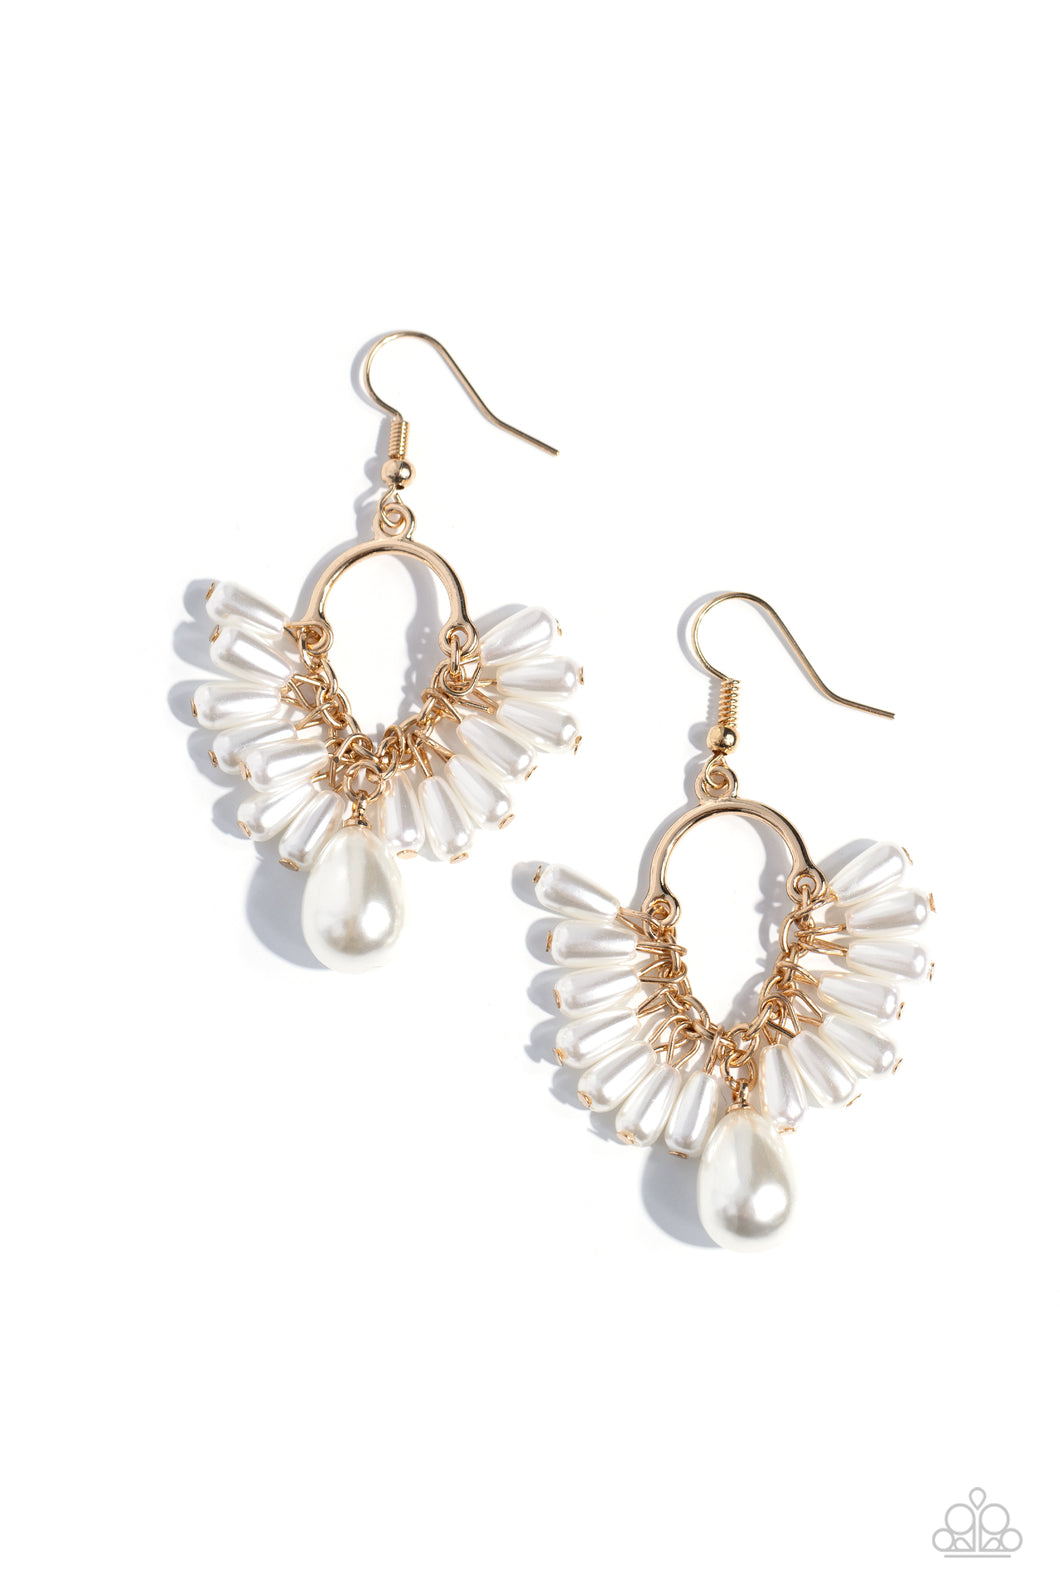 Ahoy There! Earring - Gold